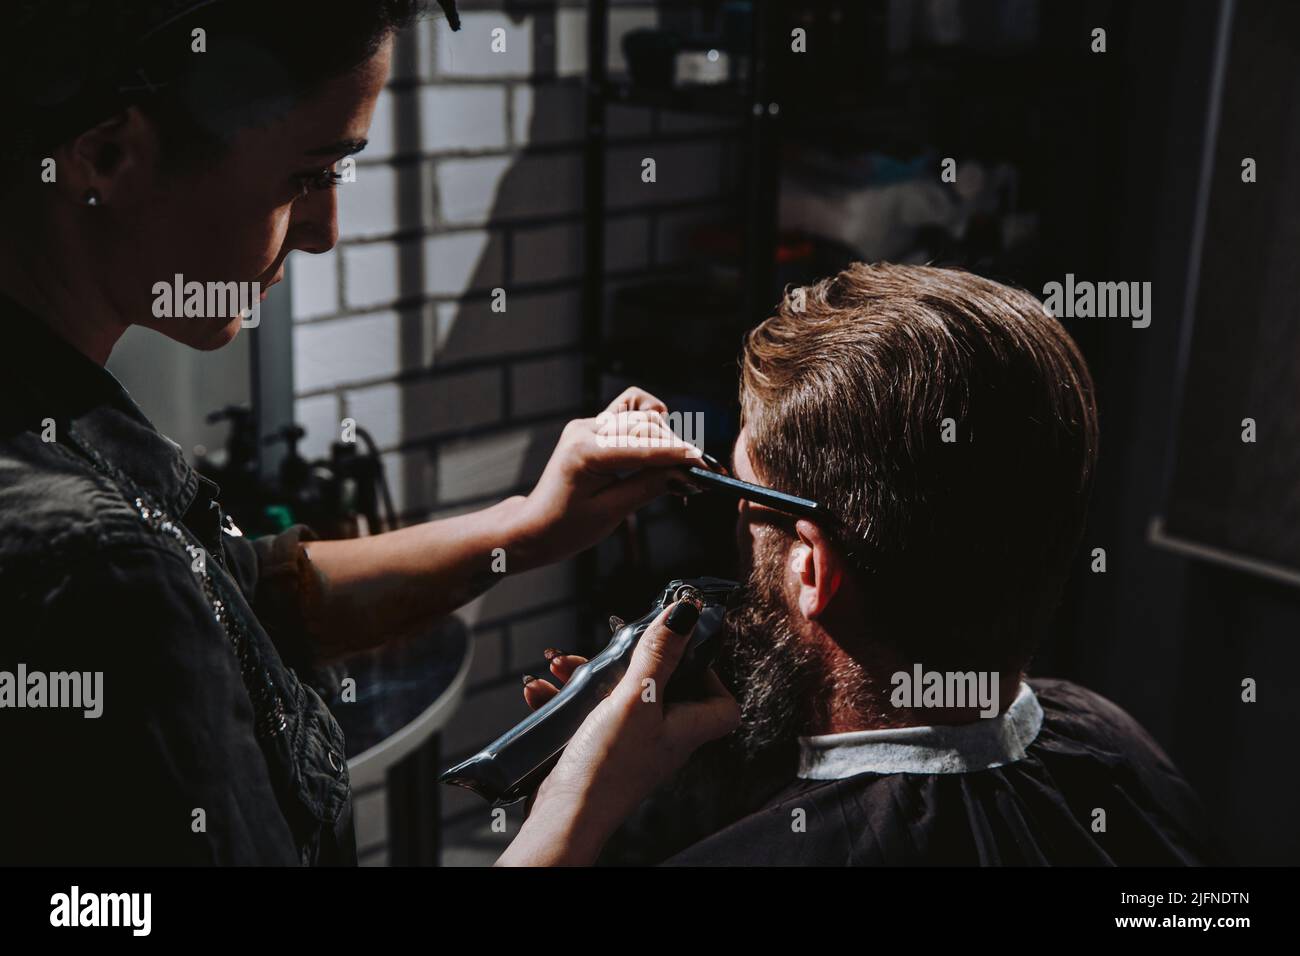 Young woman barber making haircut of bearded man in barbershop. Self-care, masculine beauty. Stock Photo